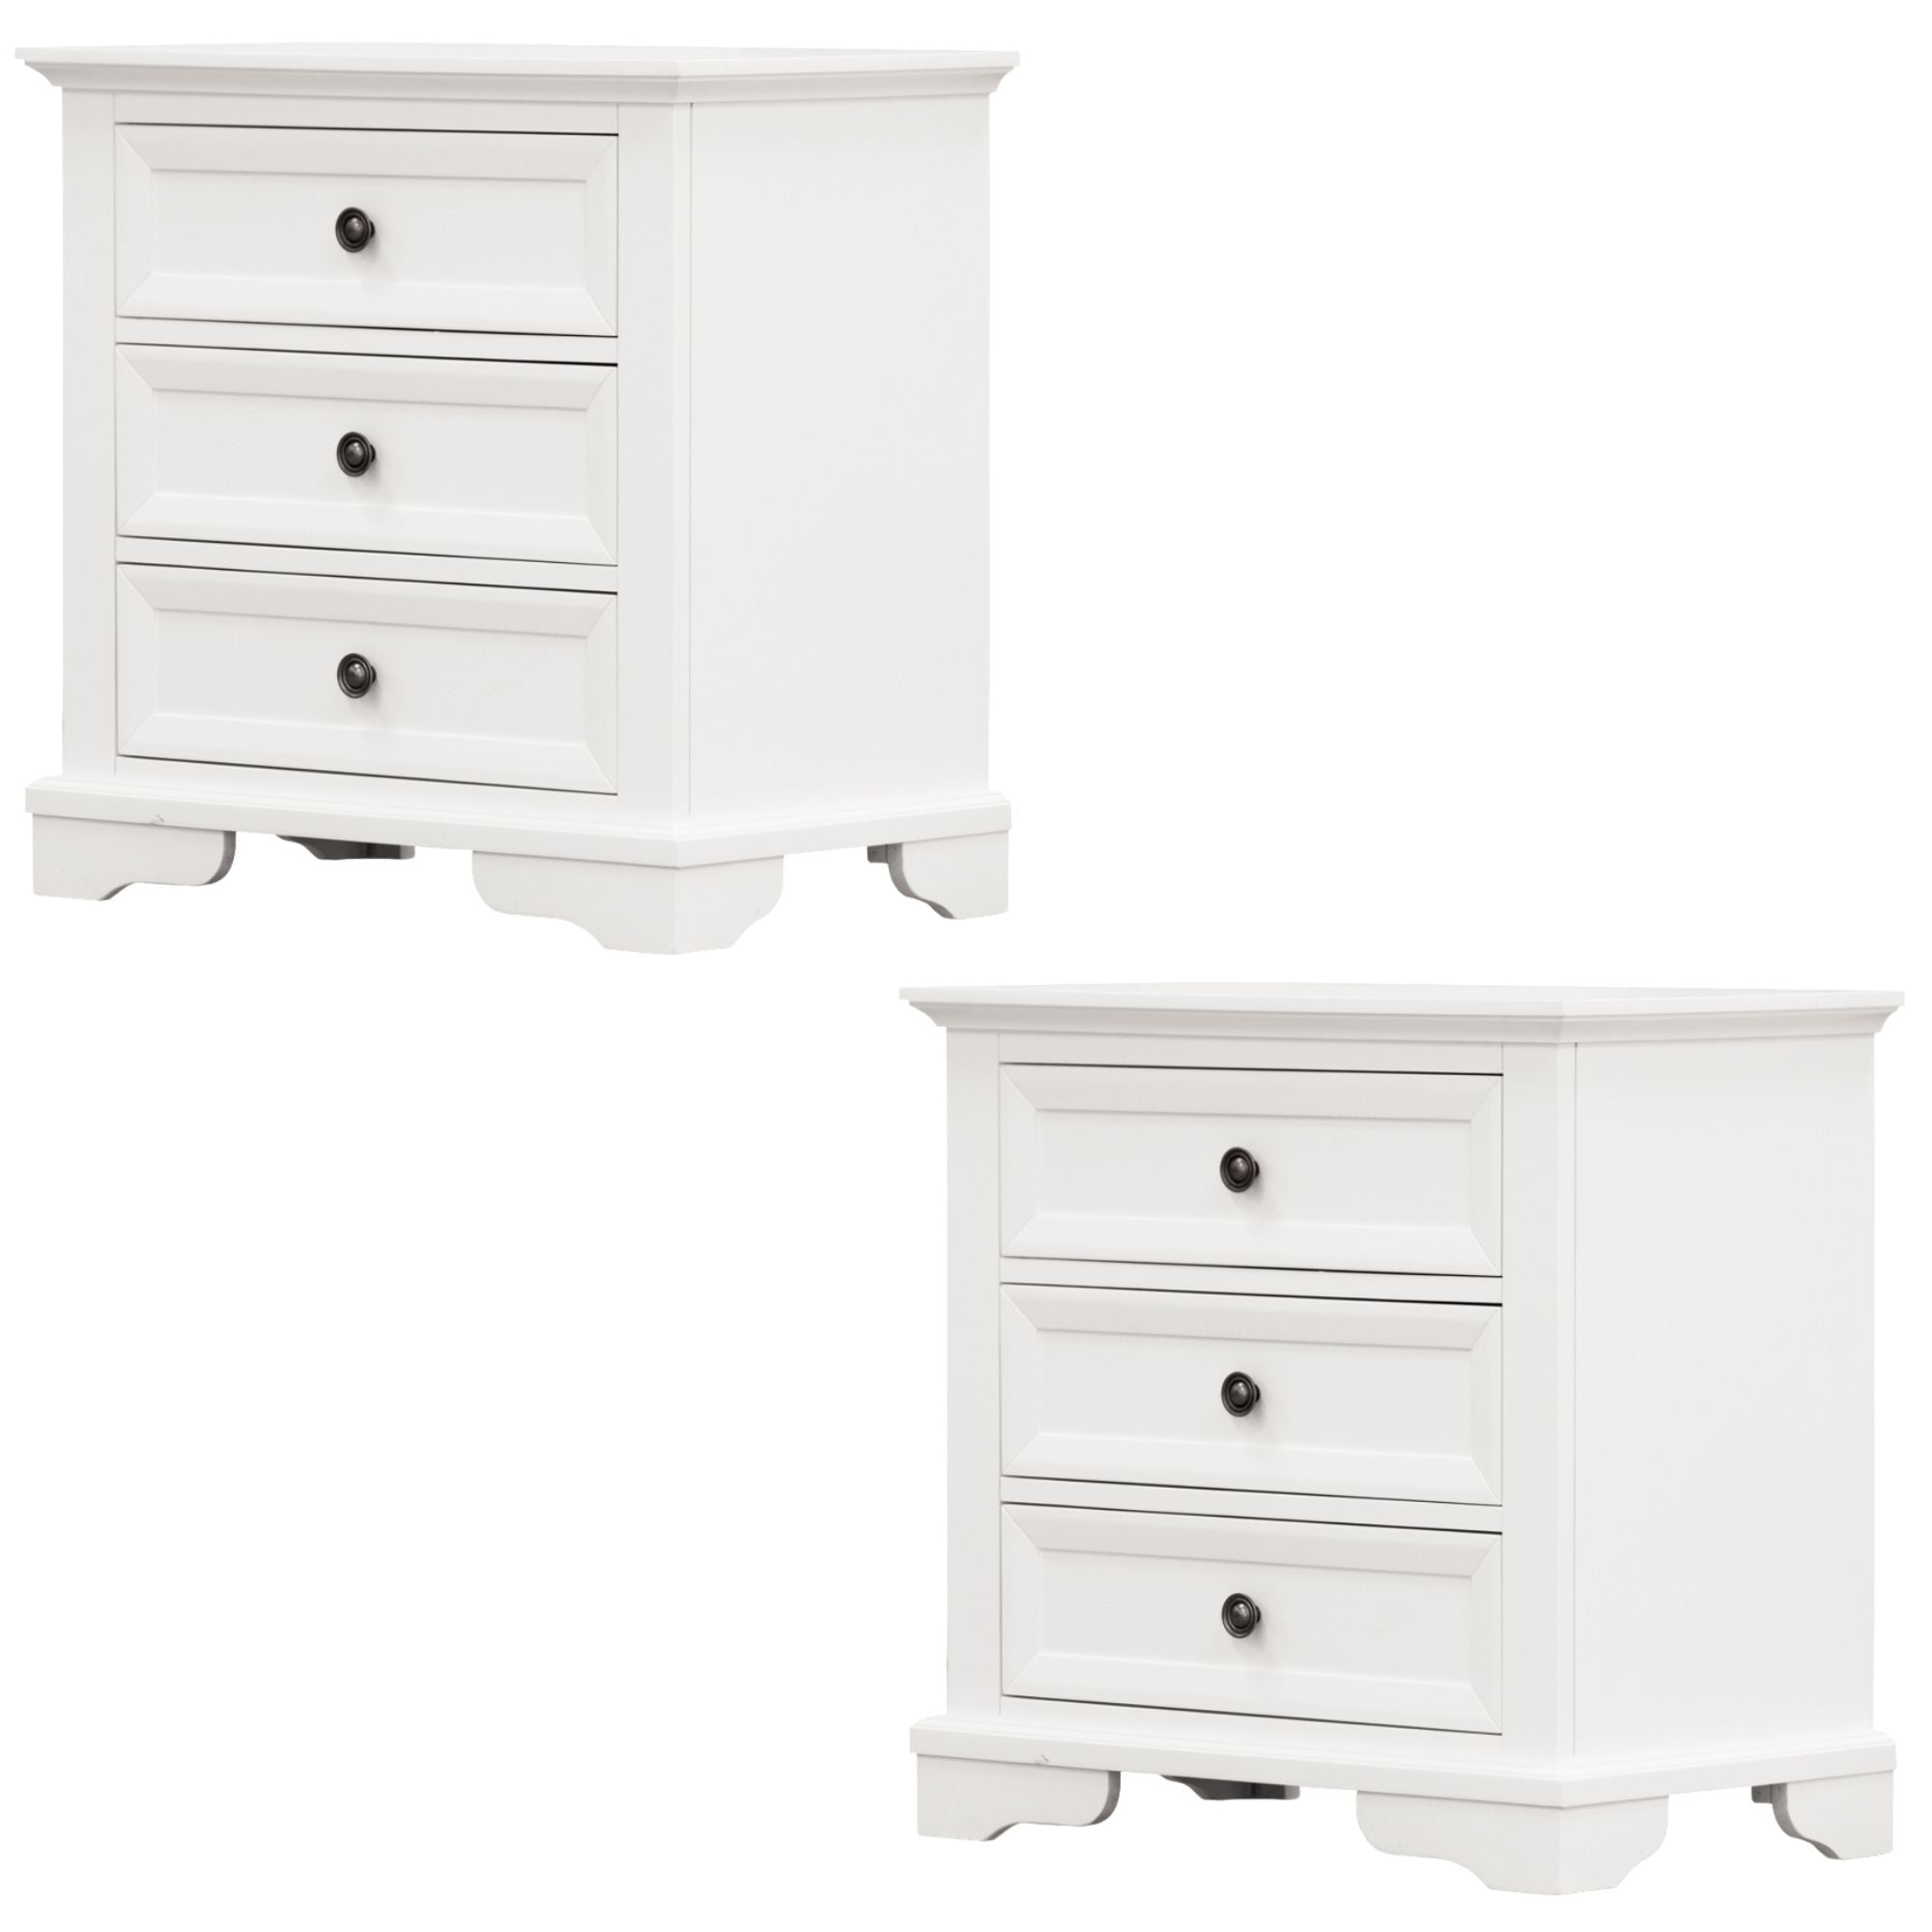 Celosia Bedside Table Set of 2pcs - 3 Drawers Storage Cabinet Nightstand - White - SILBERSHELL